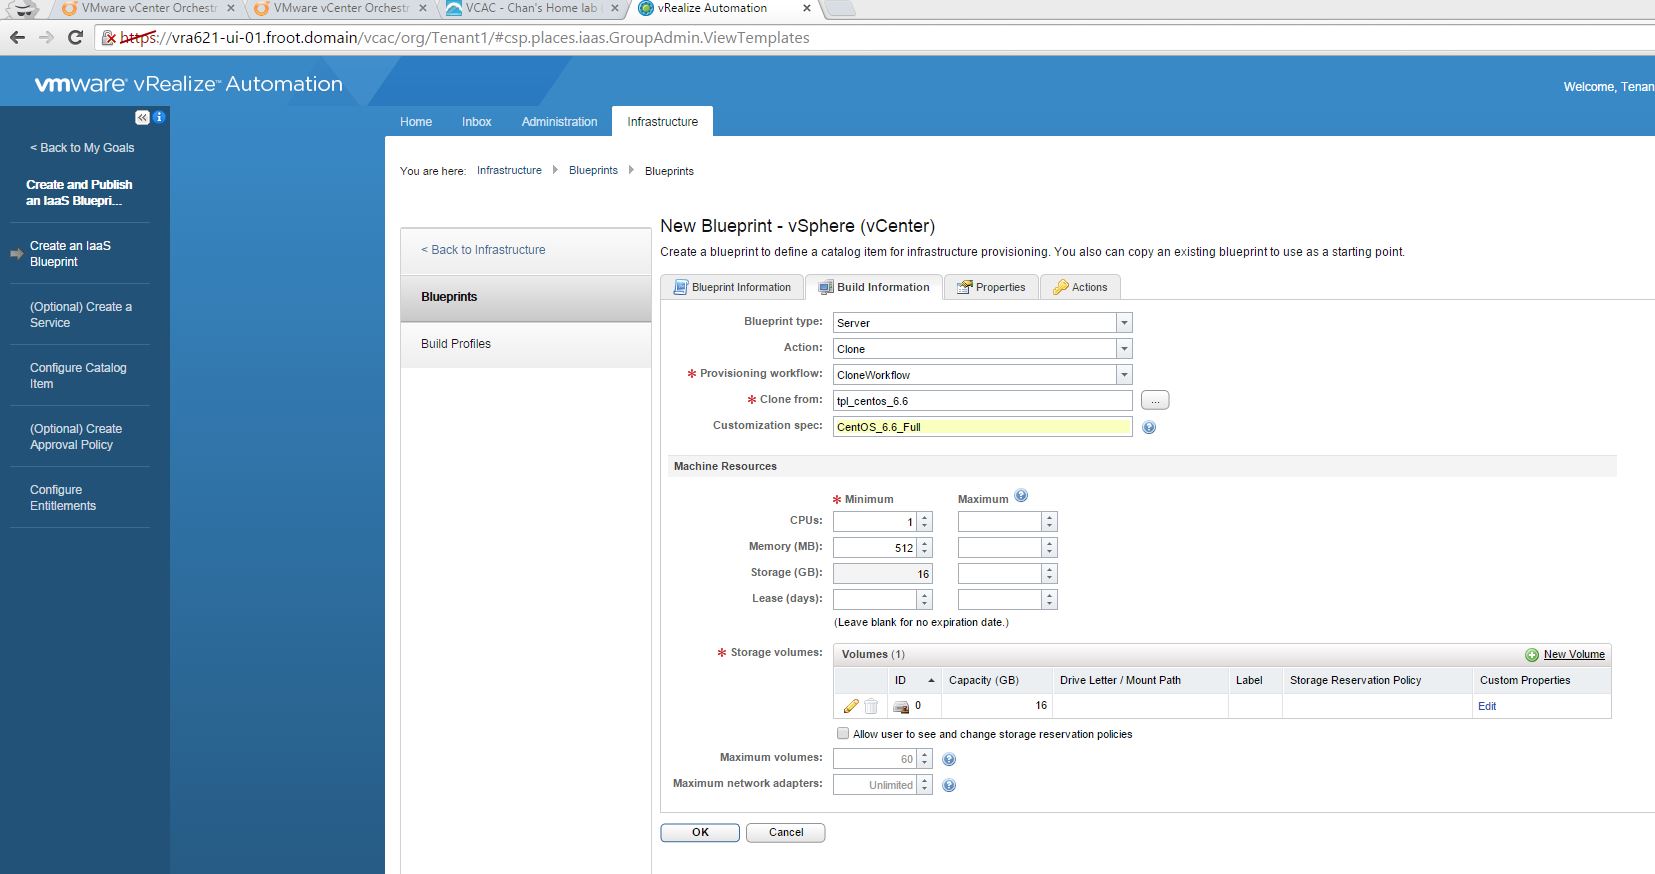 What Is VMware VRealize Automation?